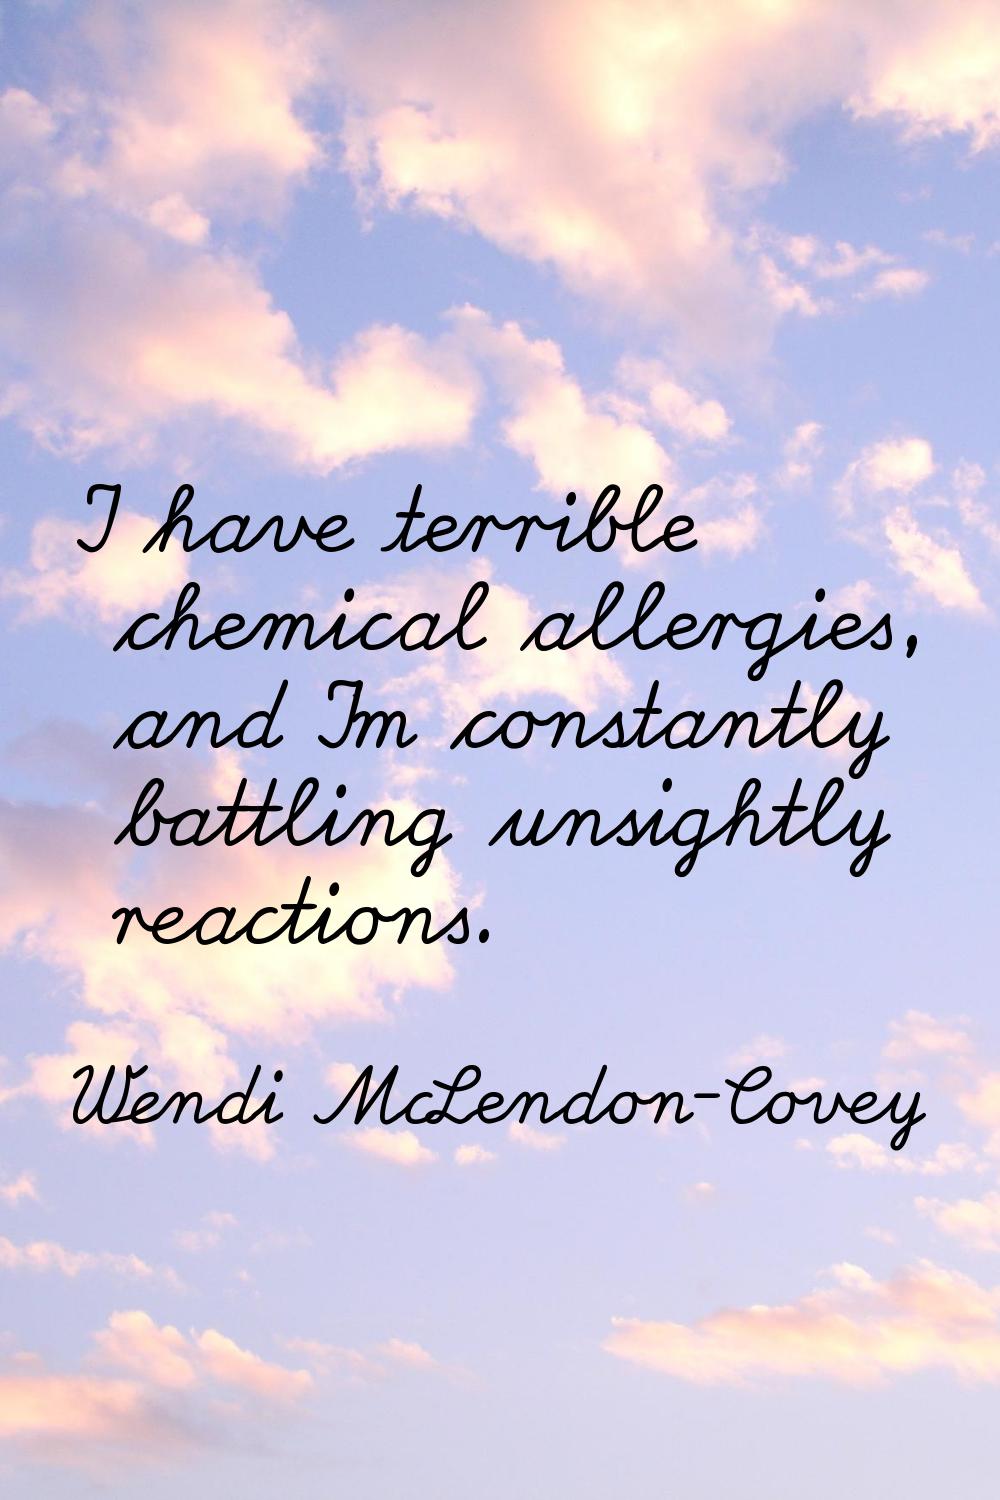 I have terrible chemical allergies, and I'm constantly battling unsightly reactions.